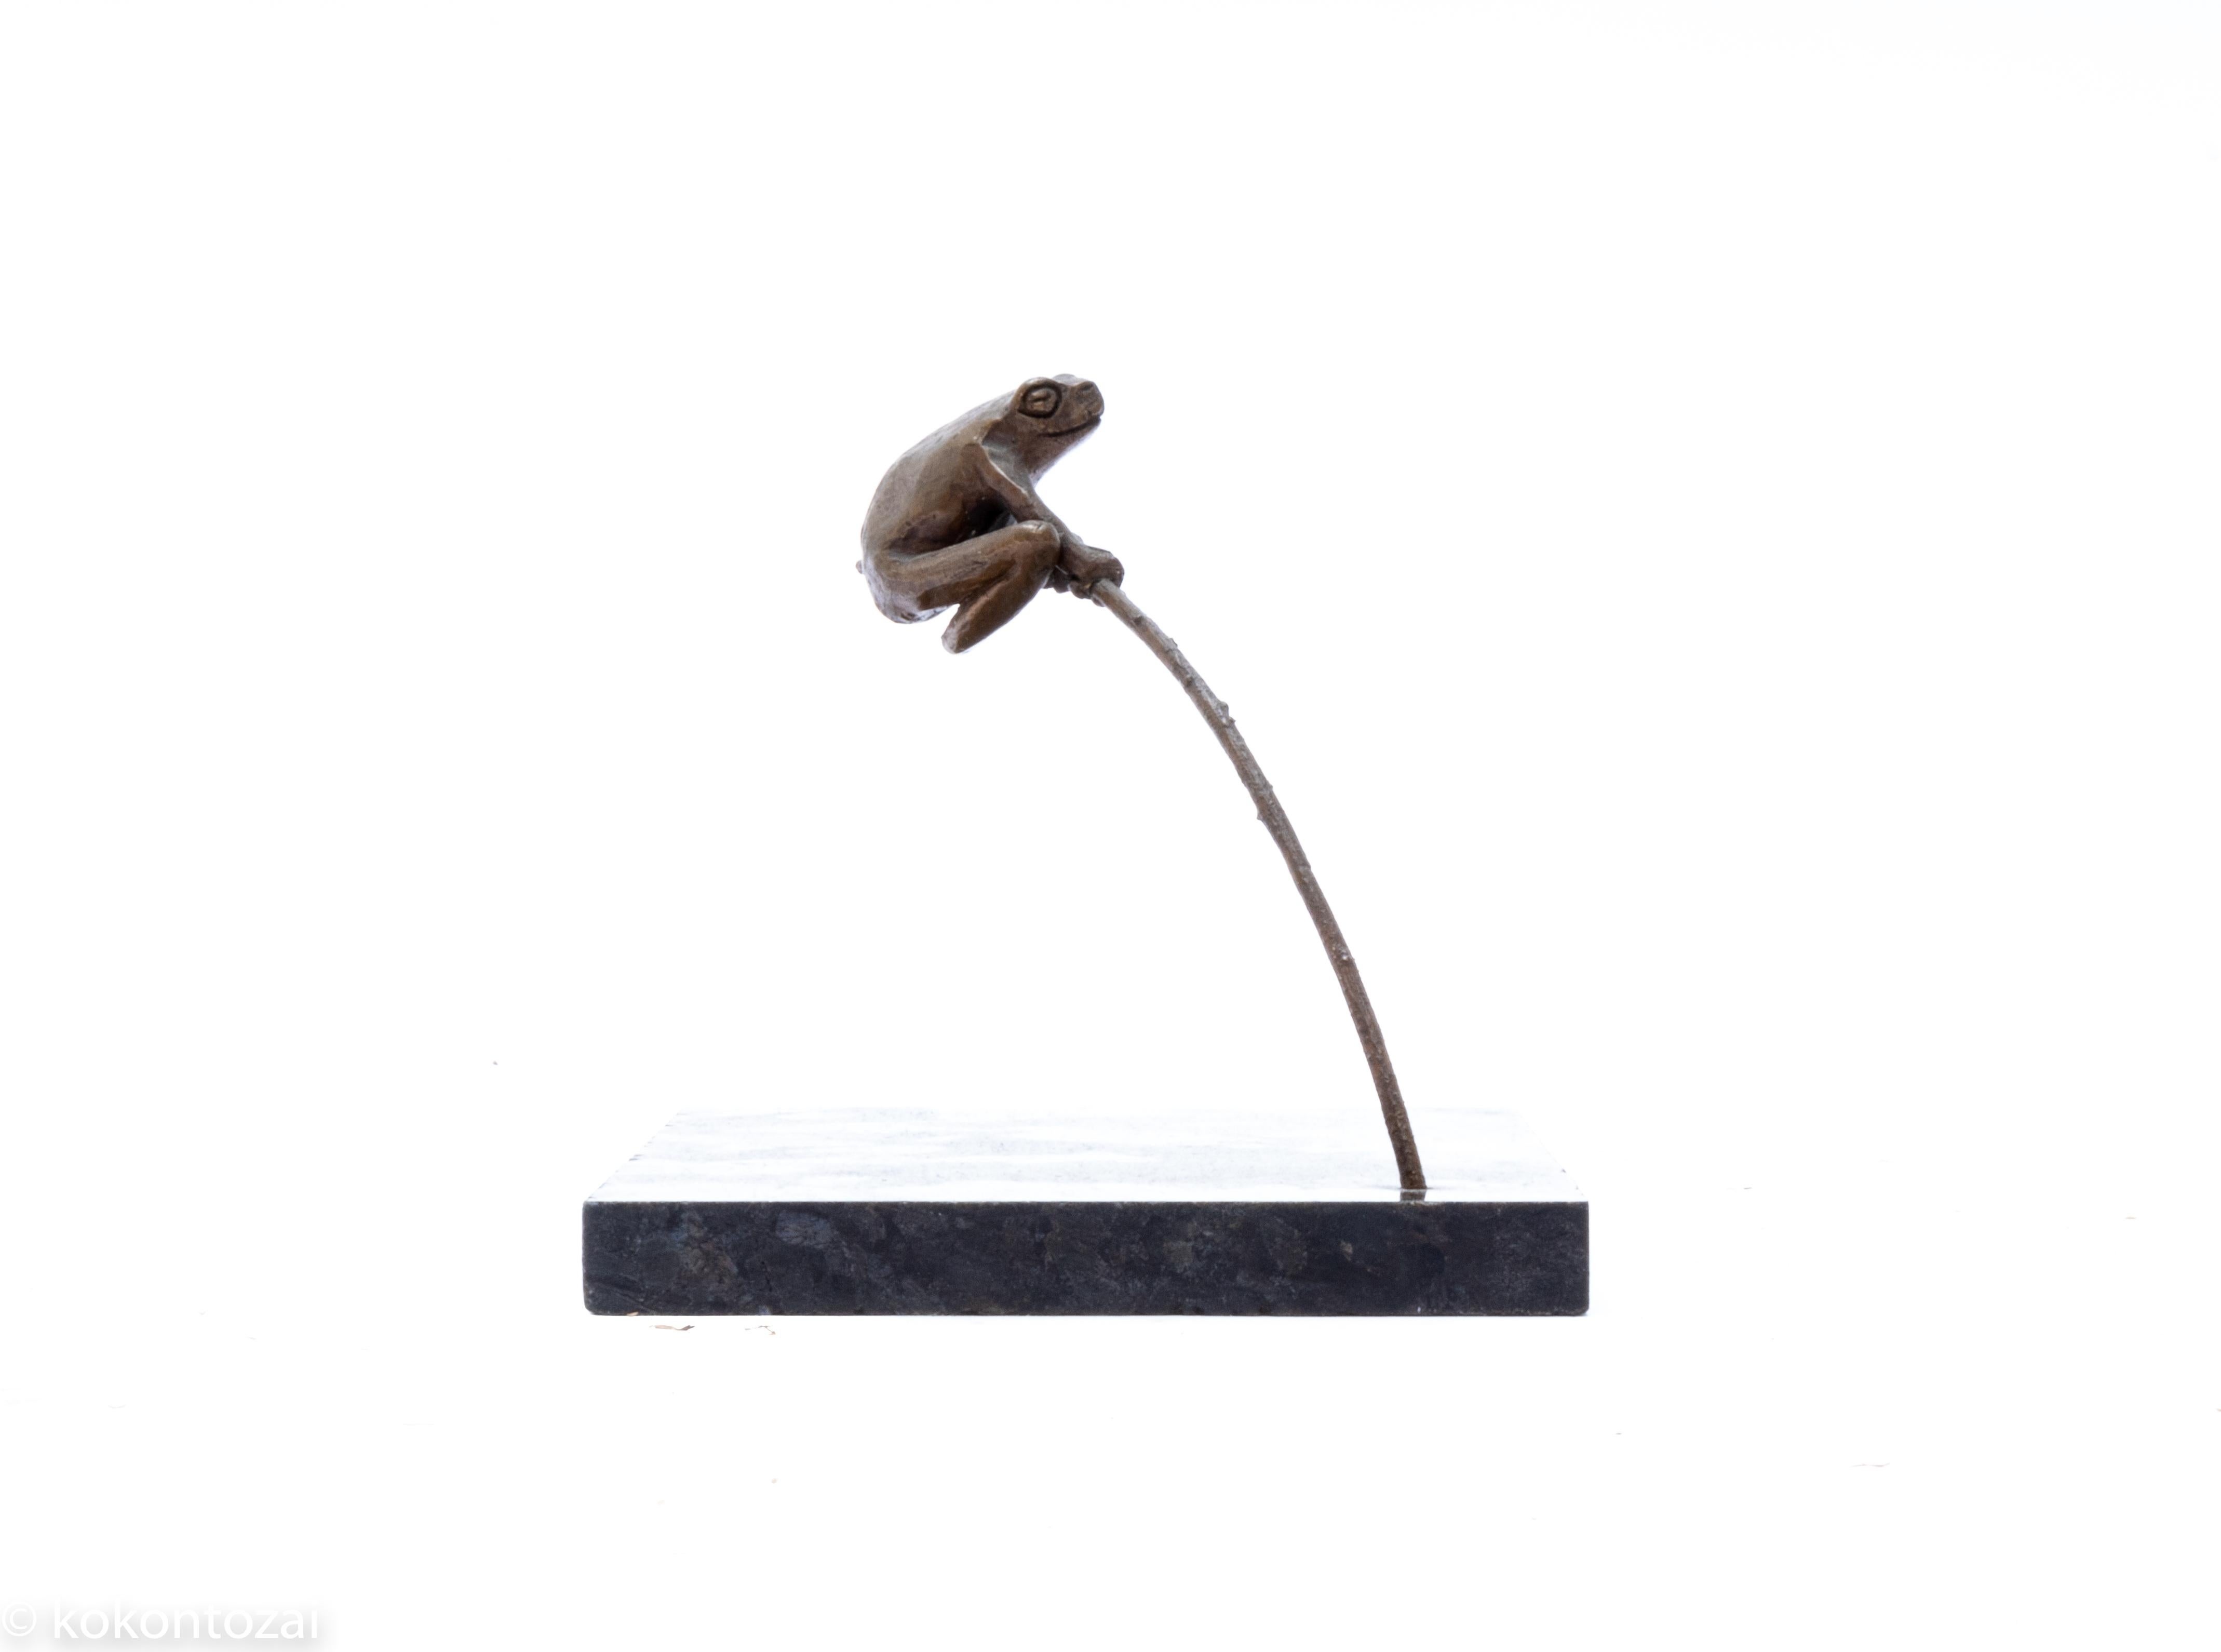 Simple frog sculpture made in bronze and marble by Judy Boot Bakker, believed to be made in the time period of 1980s. She taught craft, design and technology subjects in Hertfordshire comprehensive school. Continued in portrait sculpture and wood